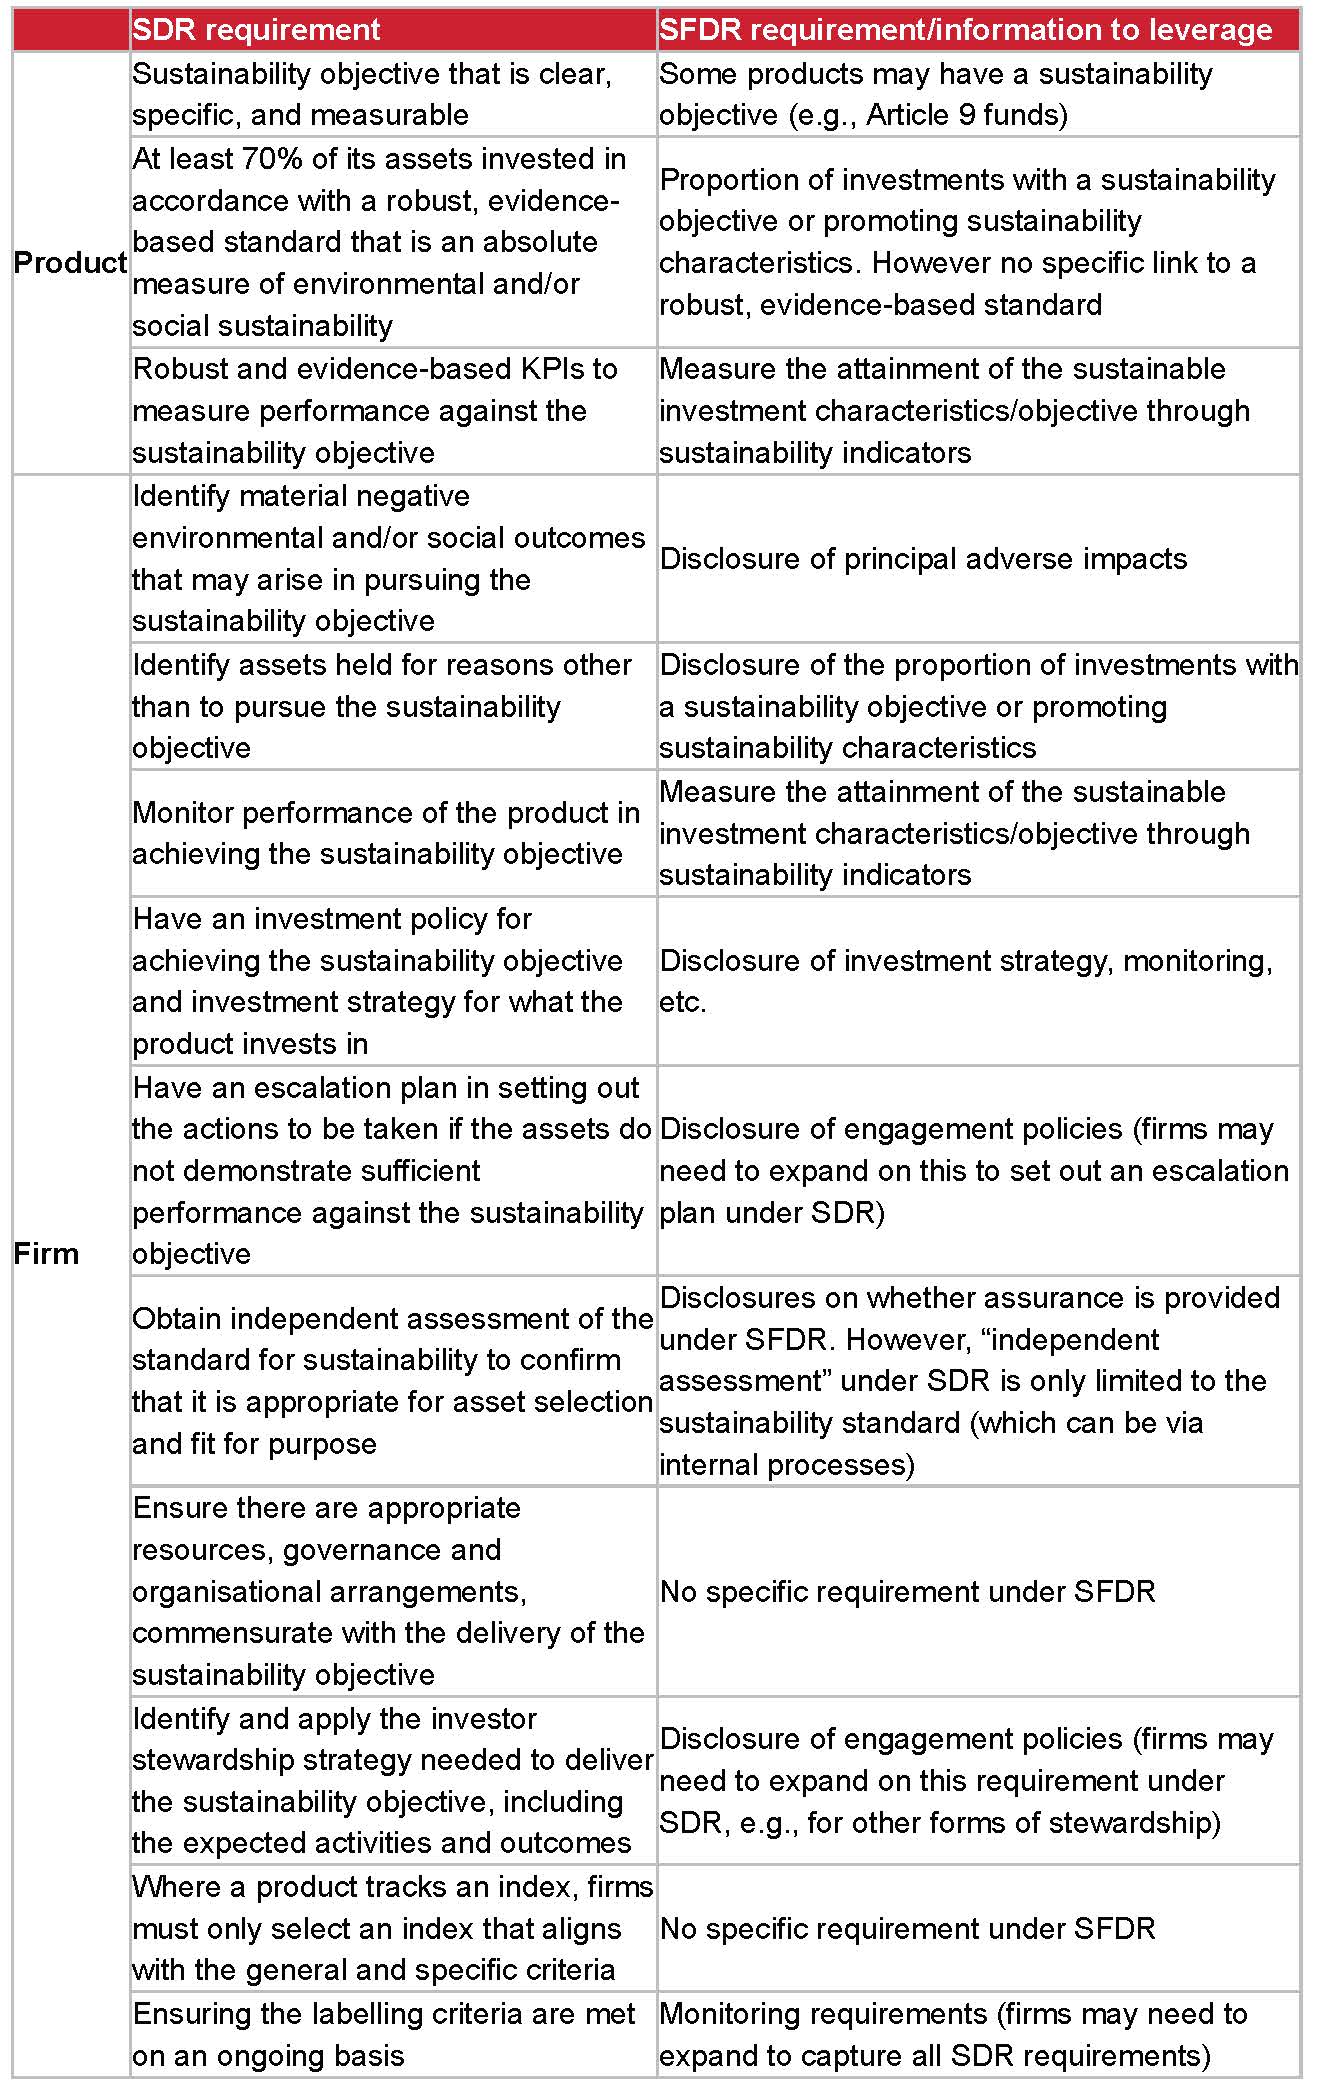 Table taken from the FCA Policy Statement mapping the SDR onto the SFDR. 